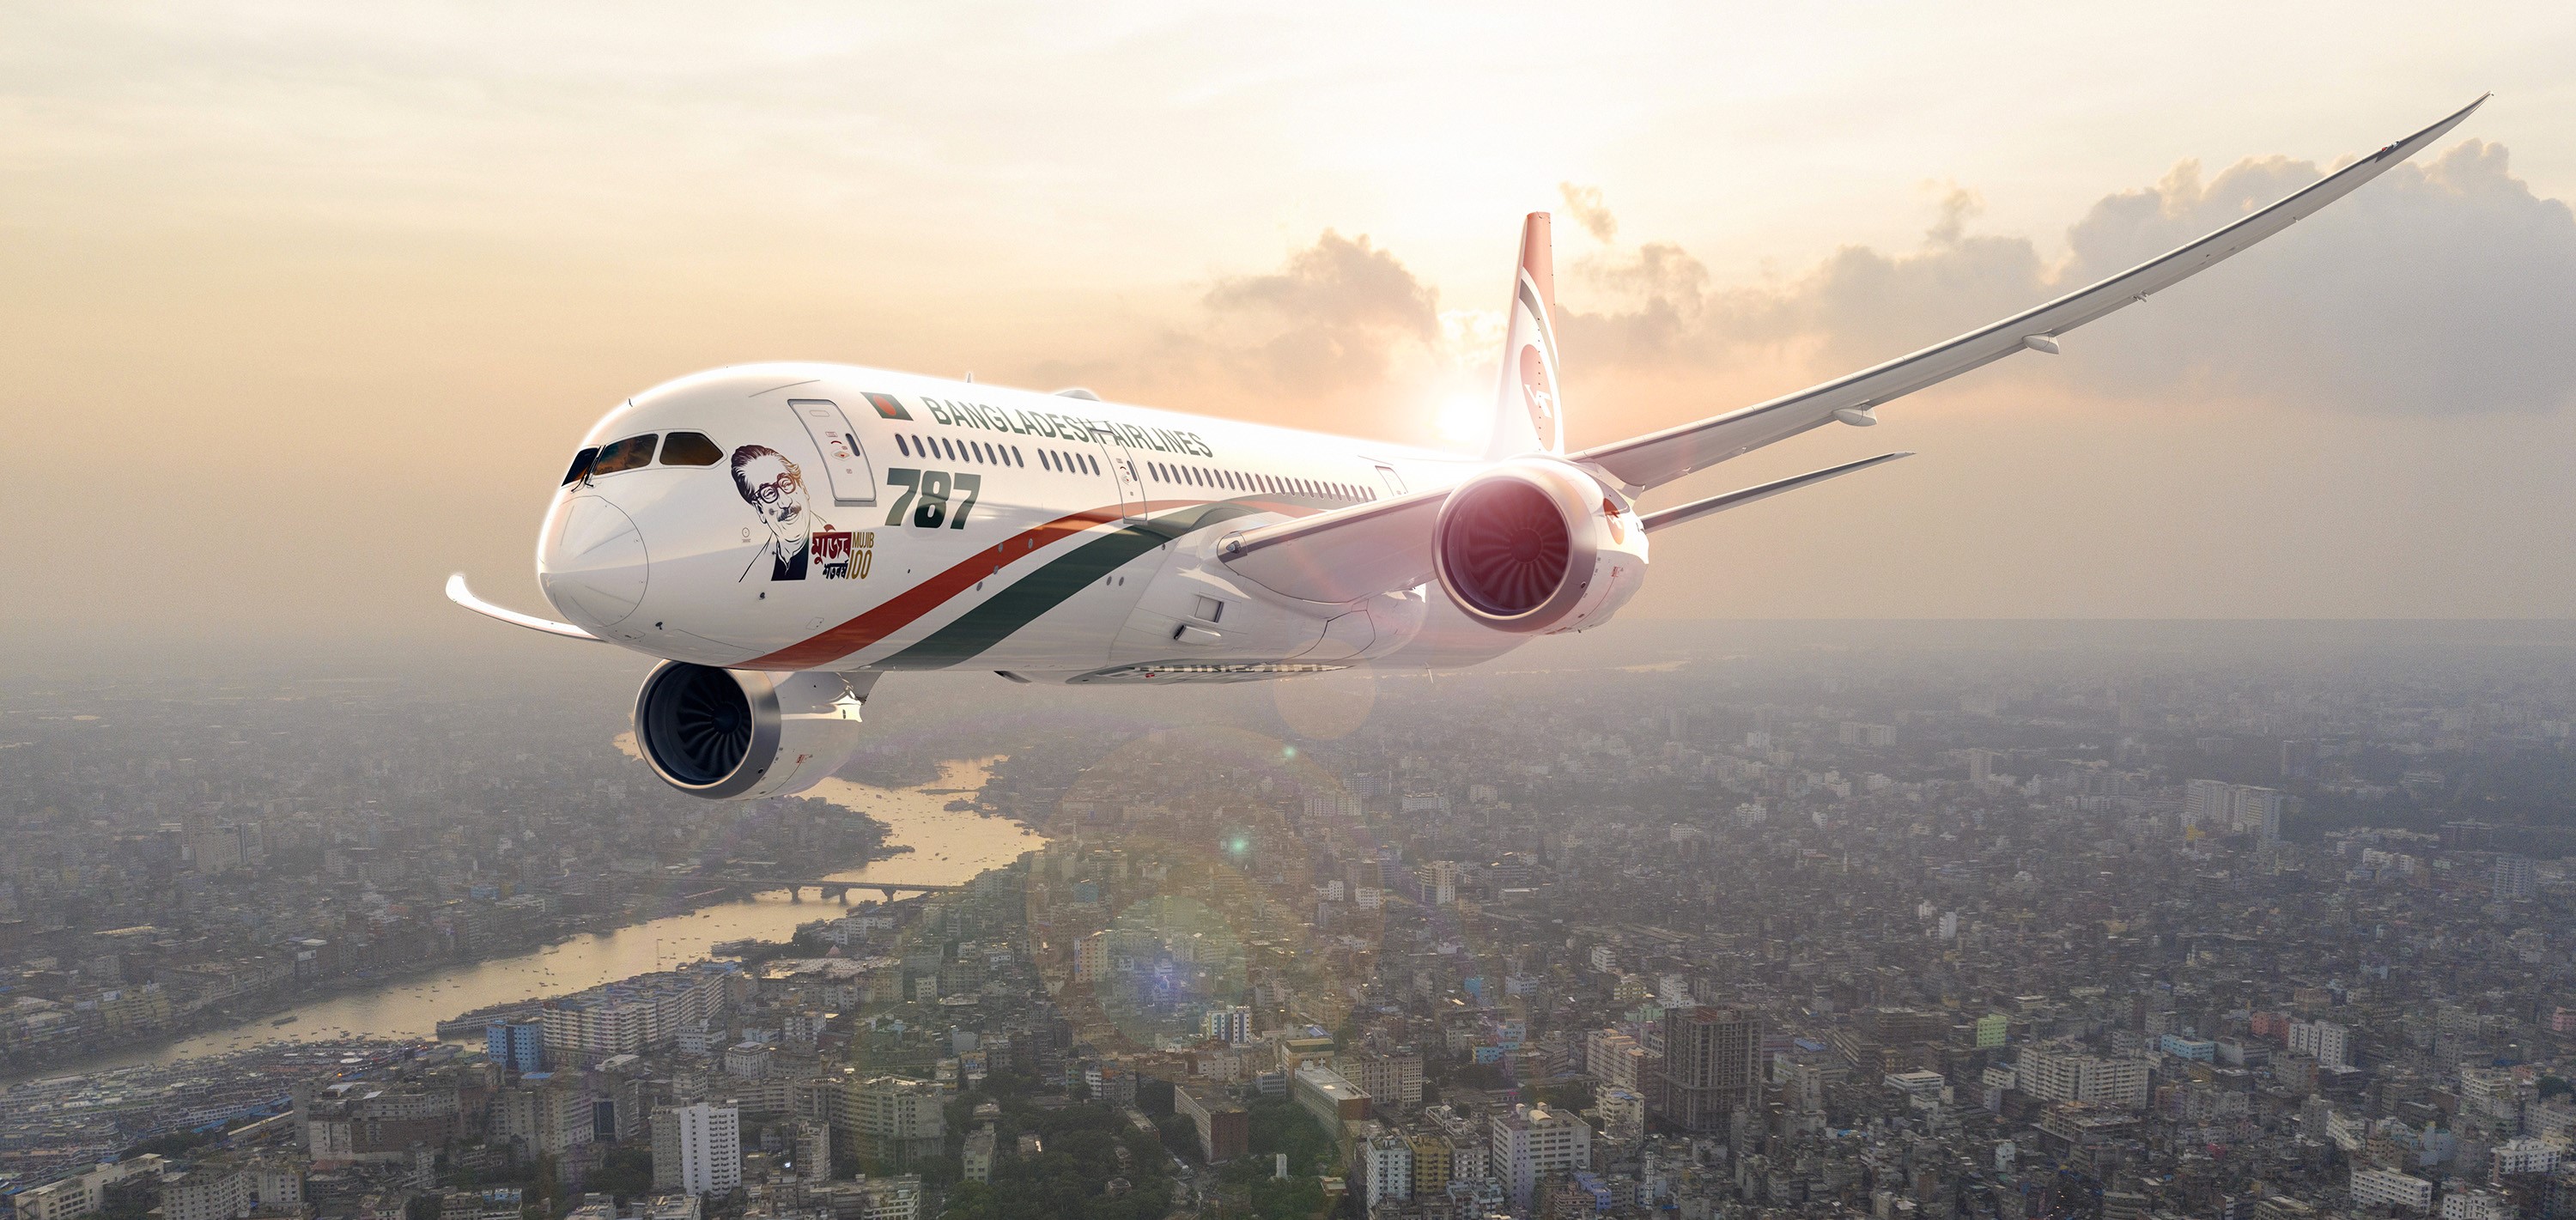 Biman Bangladesh Airlines plans to buy 32 new aircraft, Expand fleet to 47 by year 2034.